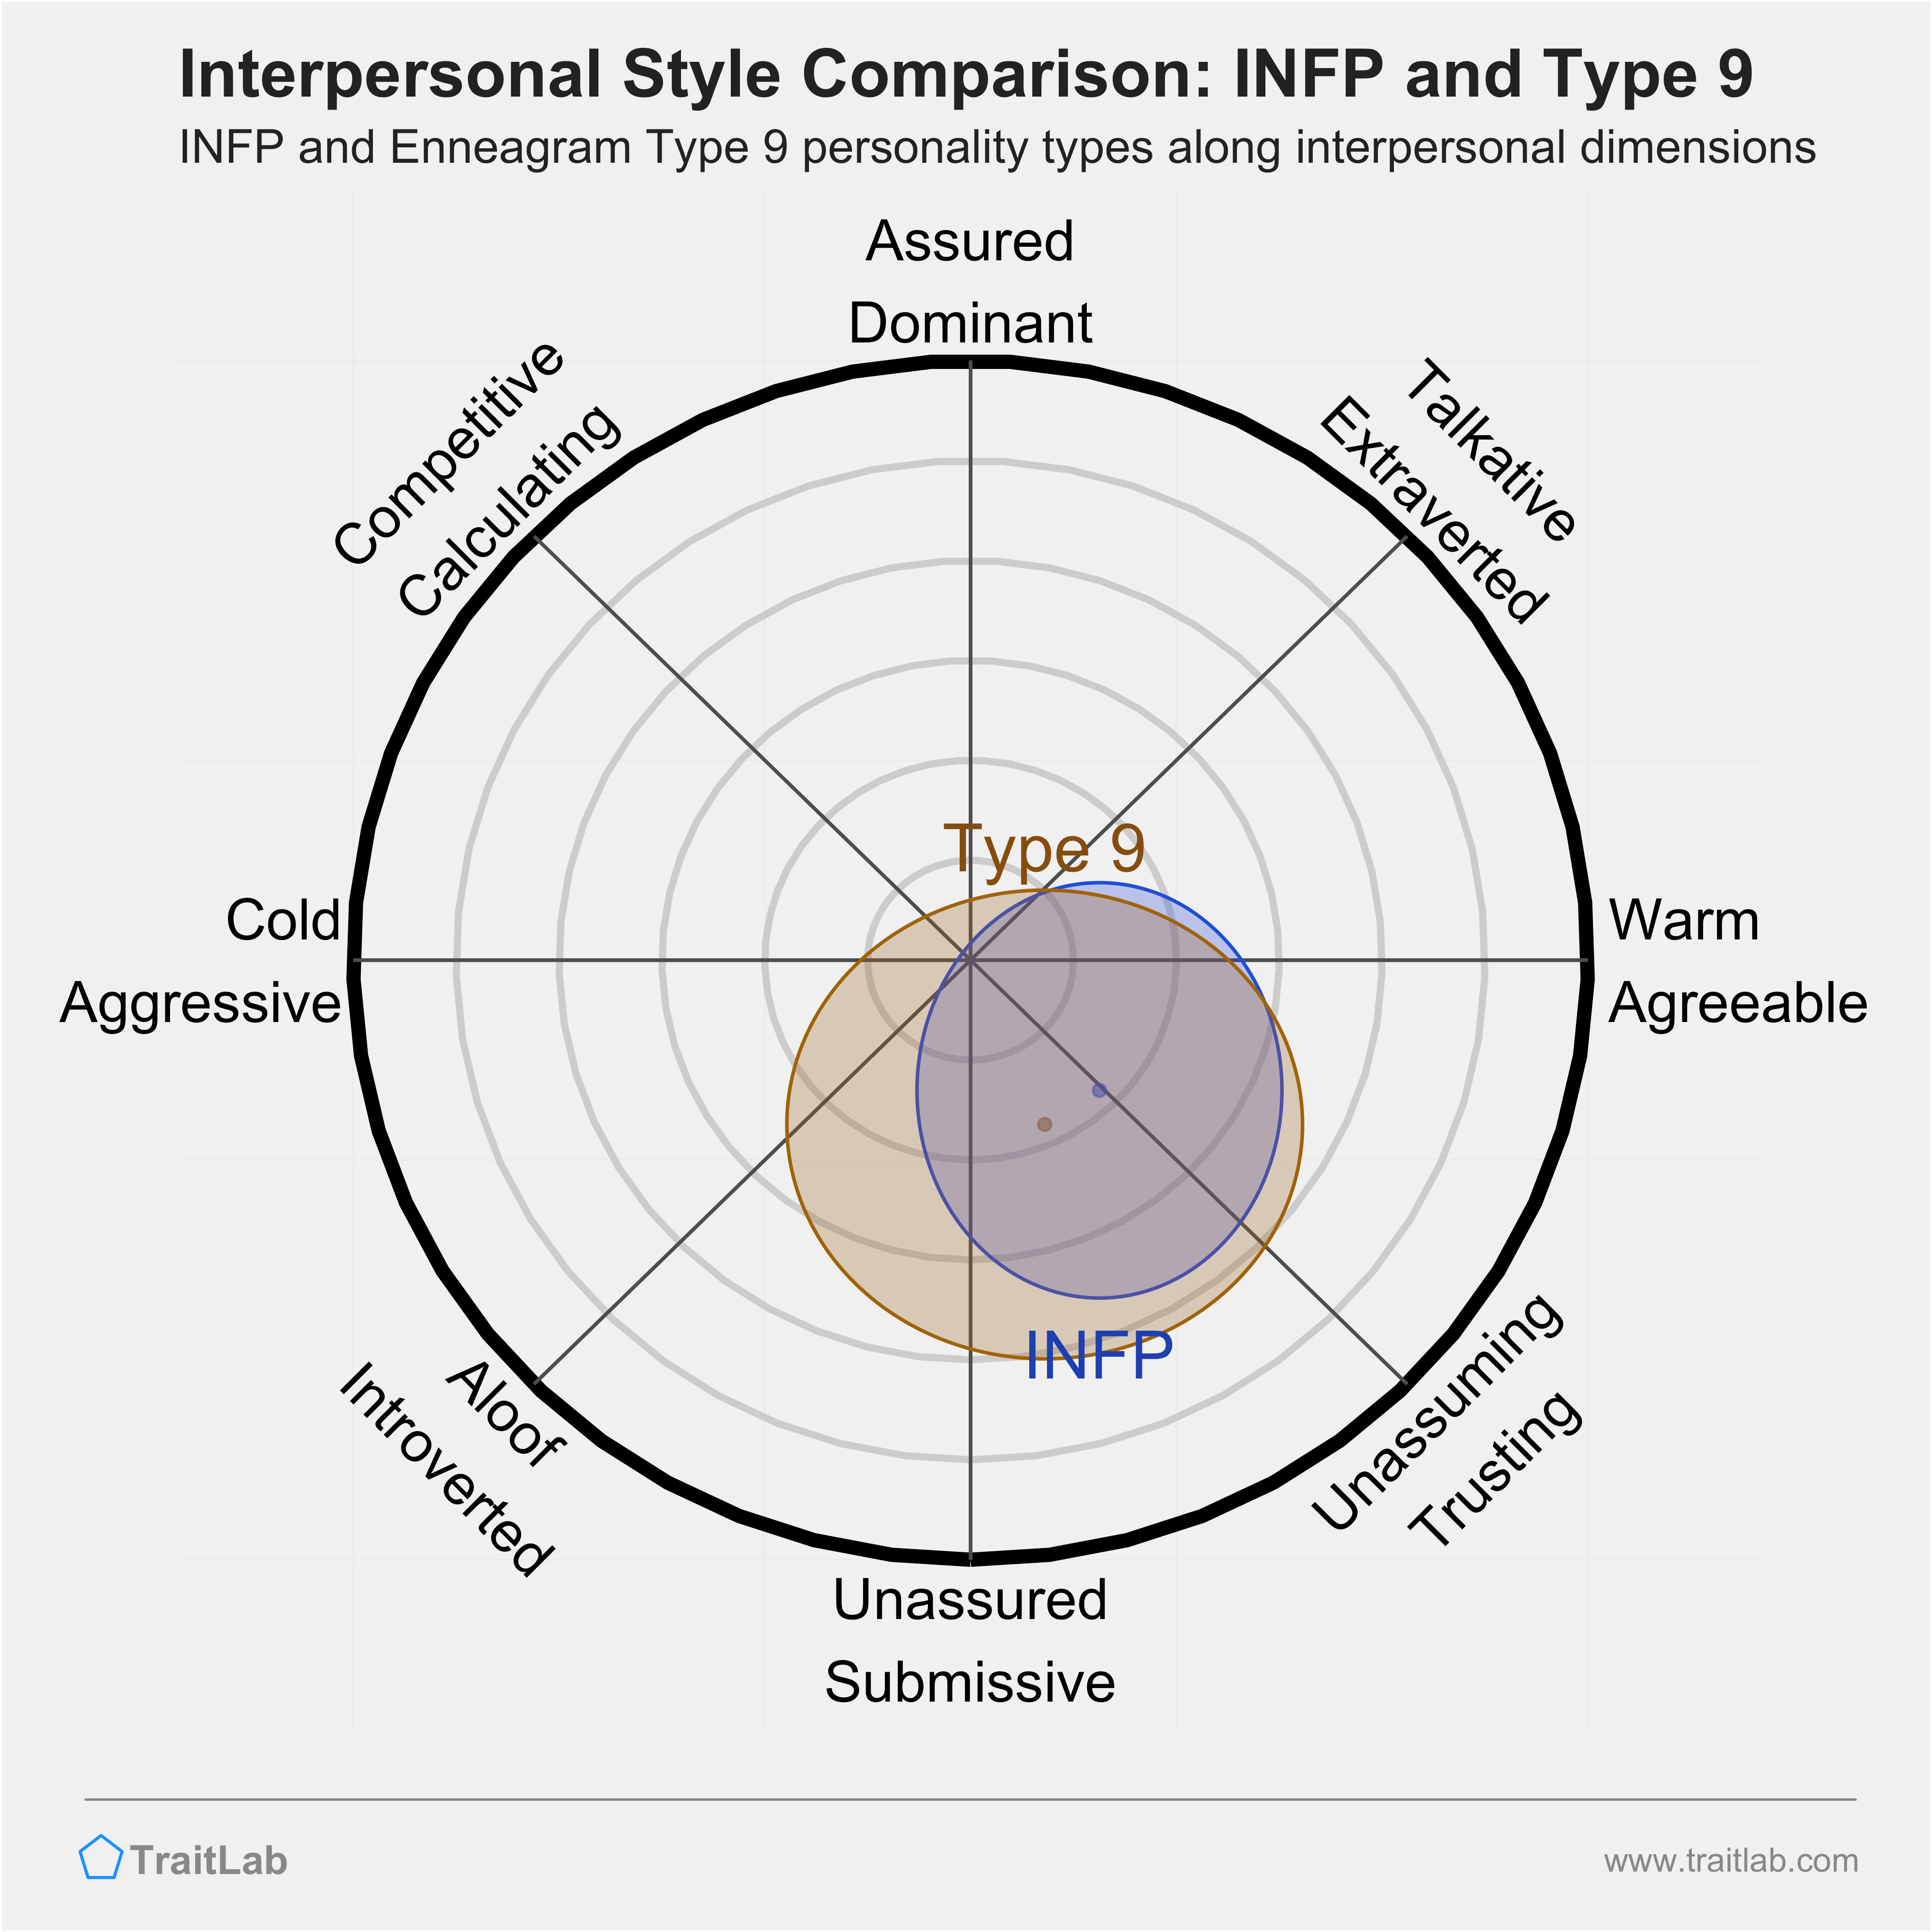 Enneagram INFP and Type 9 comparison across interpersonal dimensions